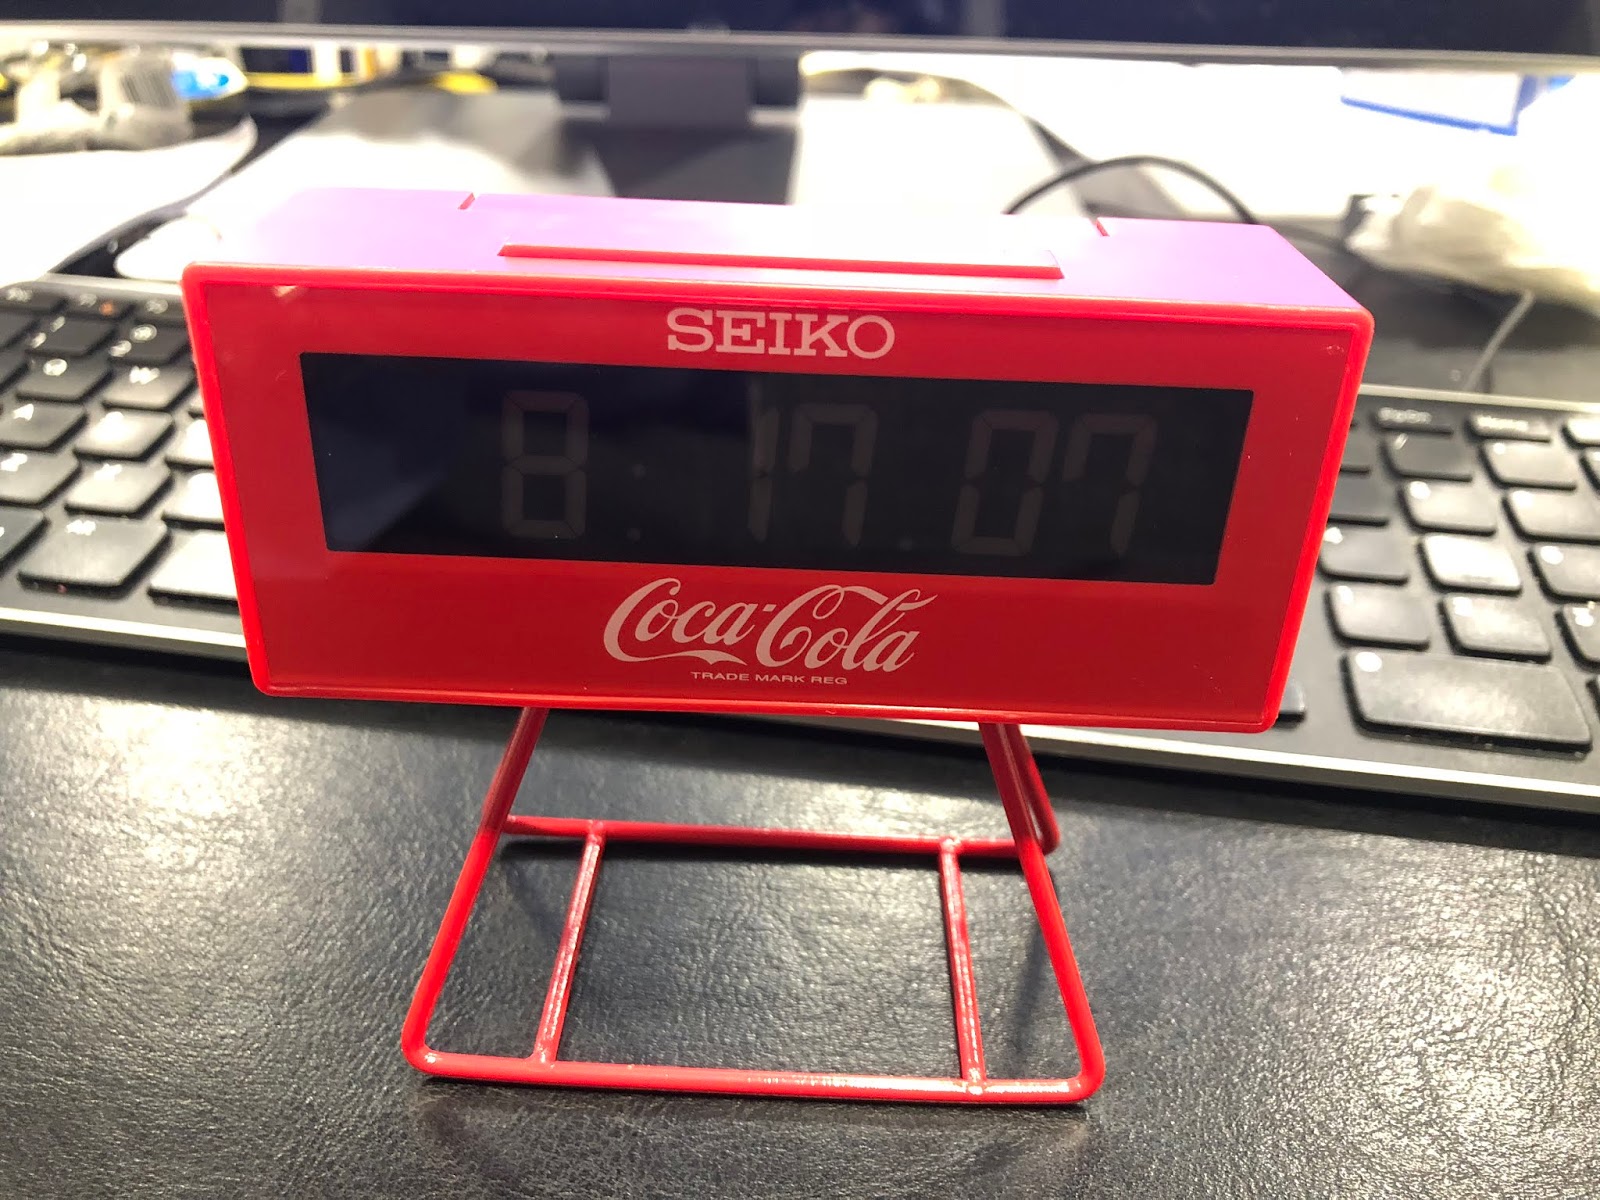 My Eastern Watch Collection: Seiko Coca-Cola Desk Clock QHL901R - A Cute  Novelty Timepiece, A Review